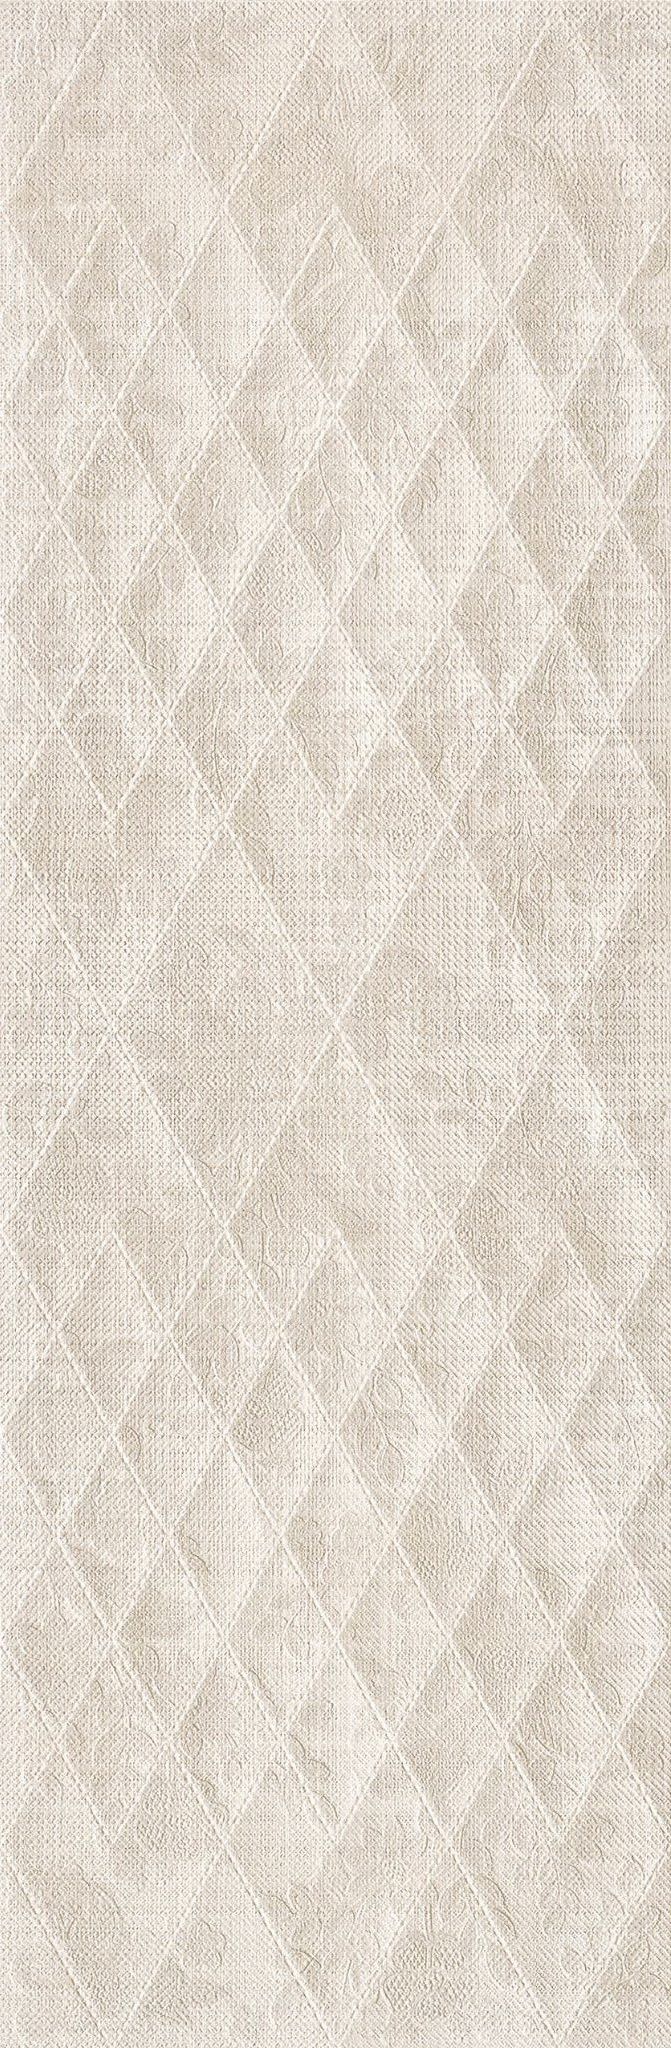 Couture Belle Marfil 295x900